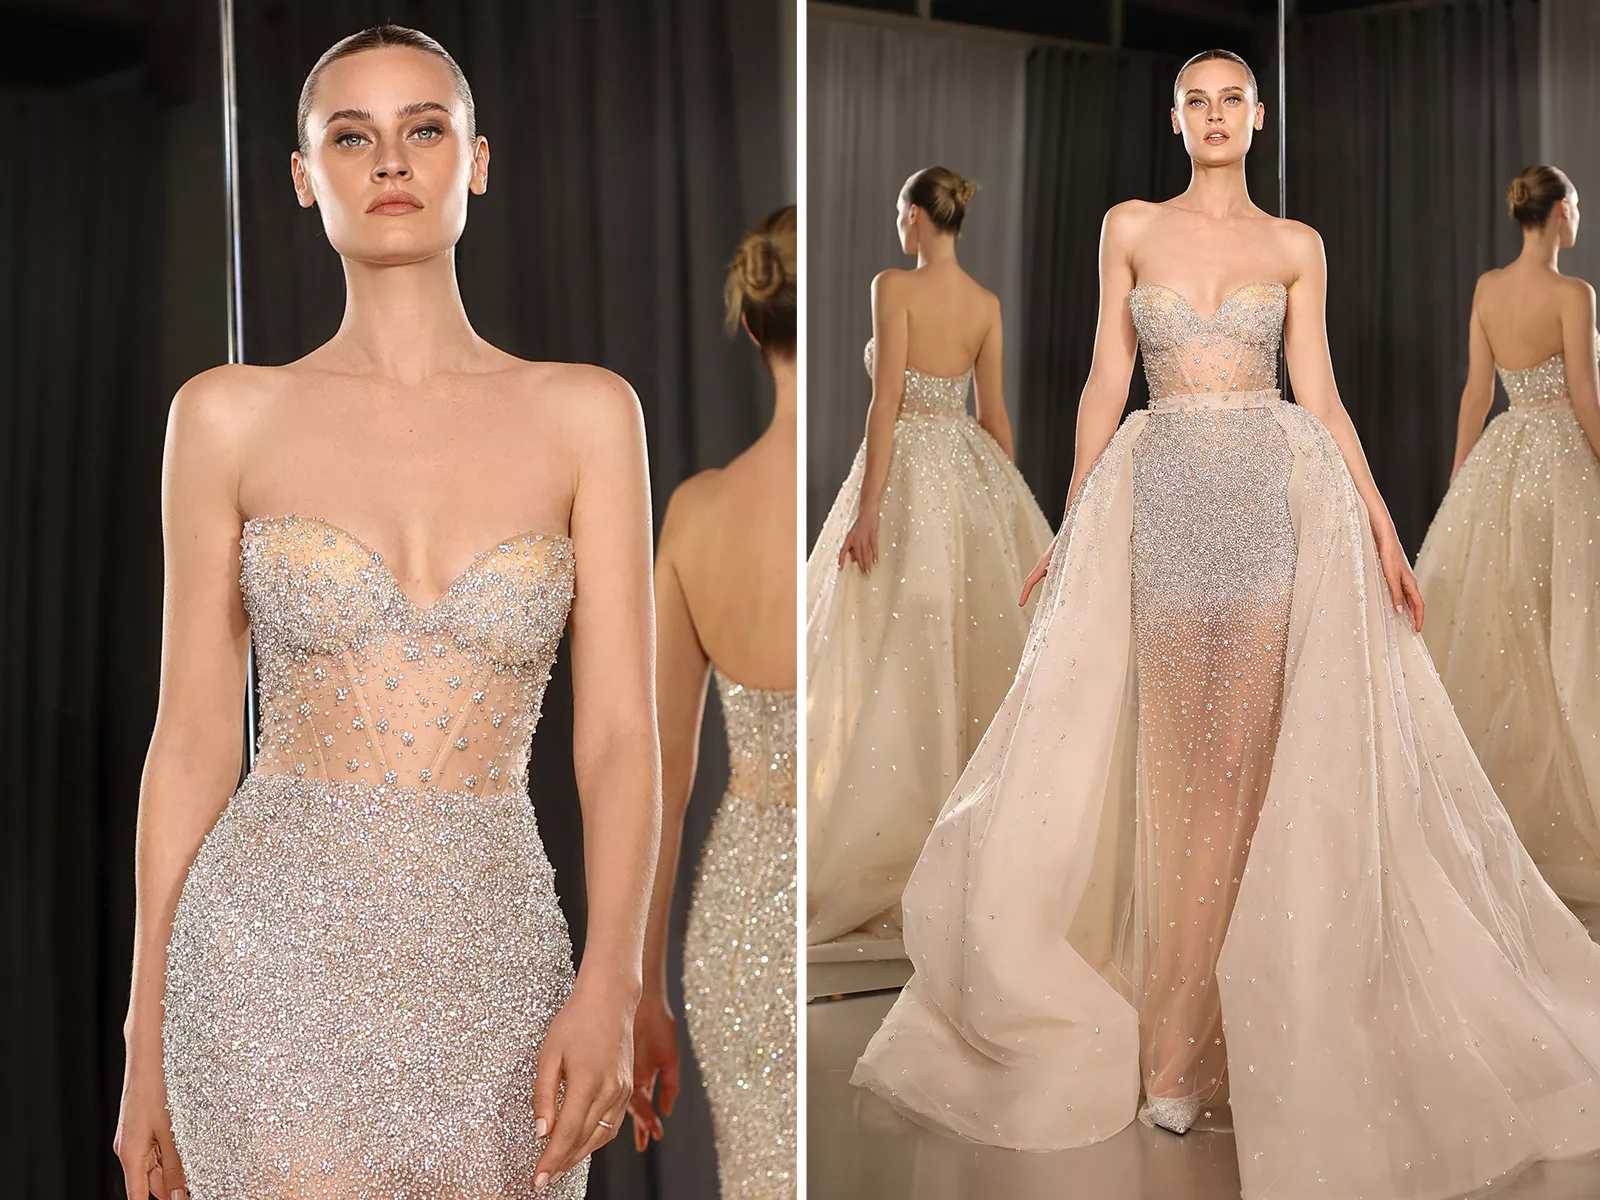 Bridal trend: Extremely revealing, low-cut wedding gowns - Boing